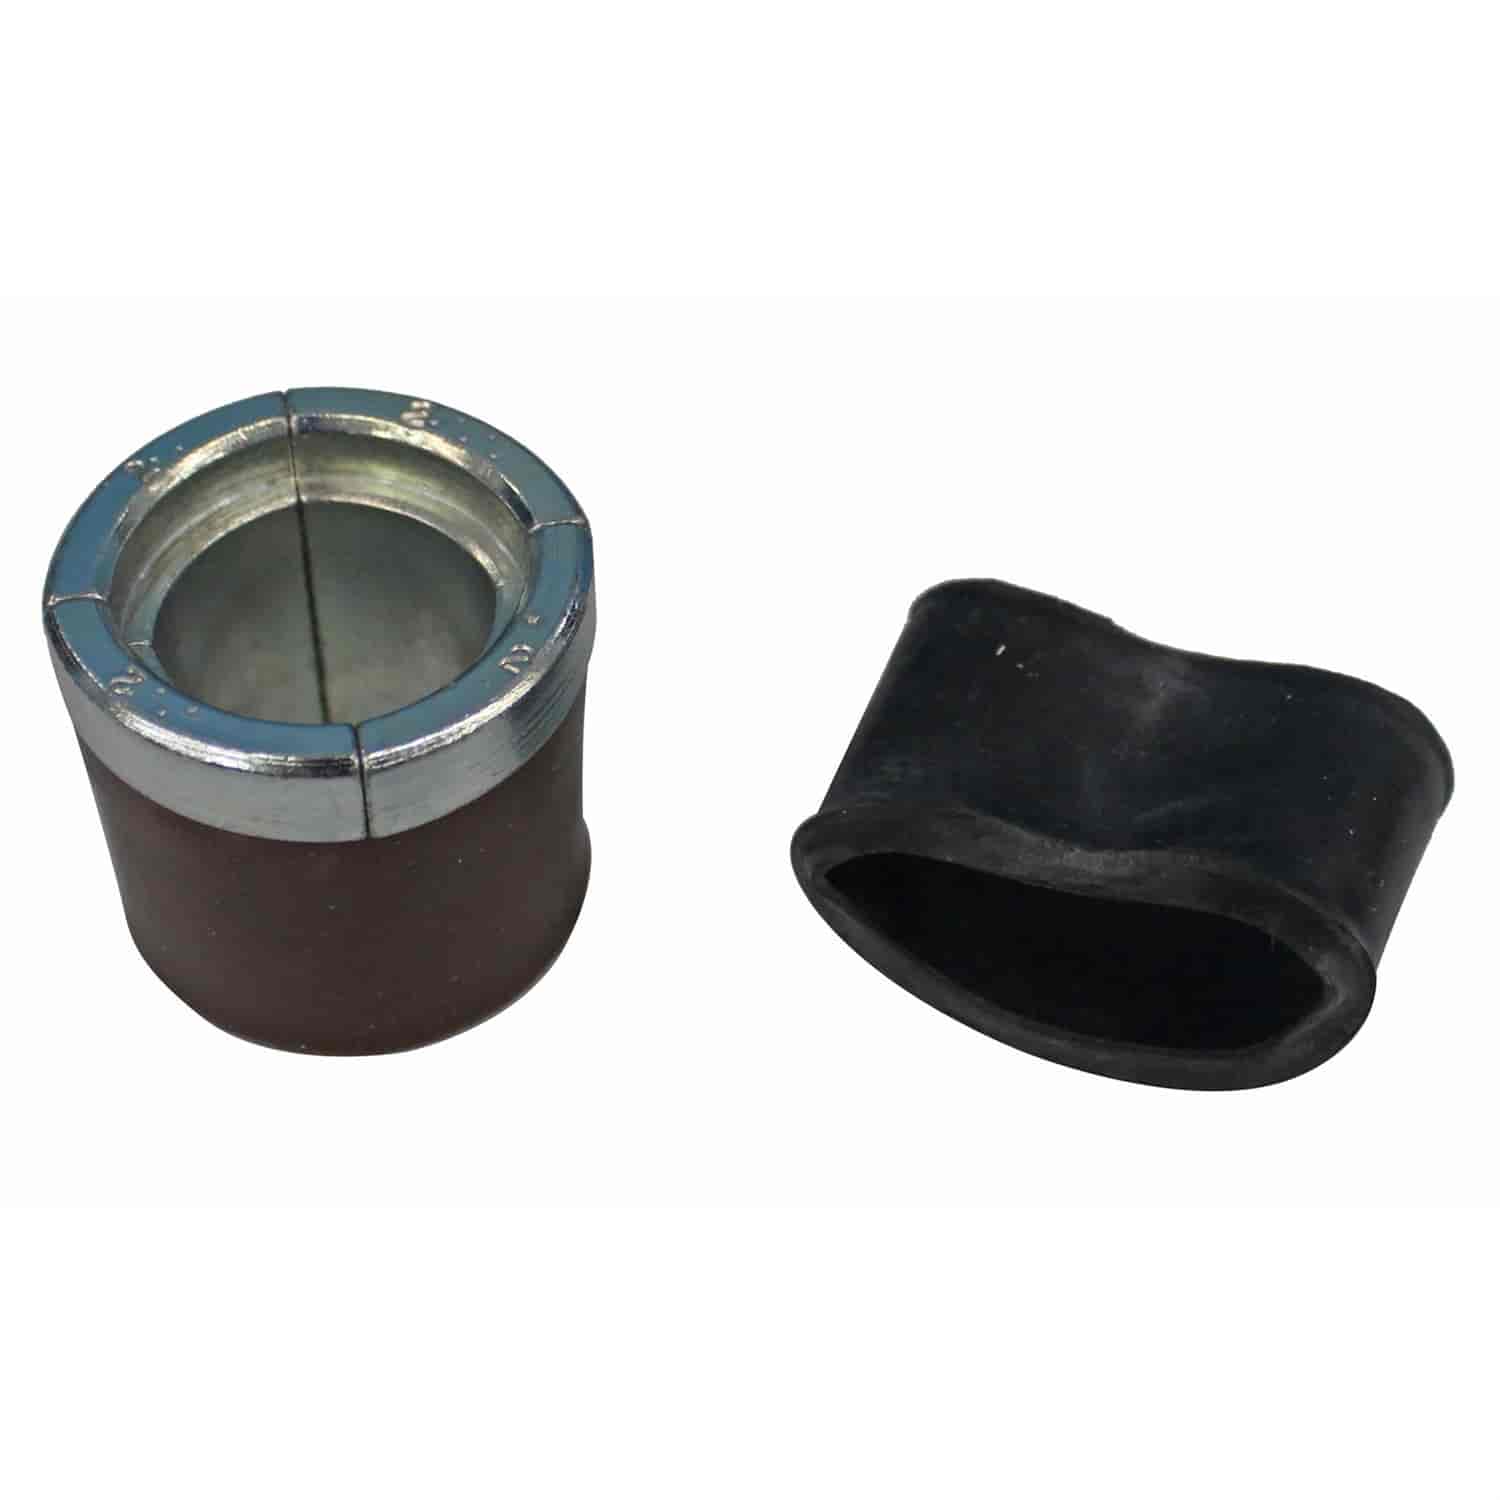 Expander Collet Bearing ID: 1.475" - 1.700"